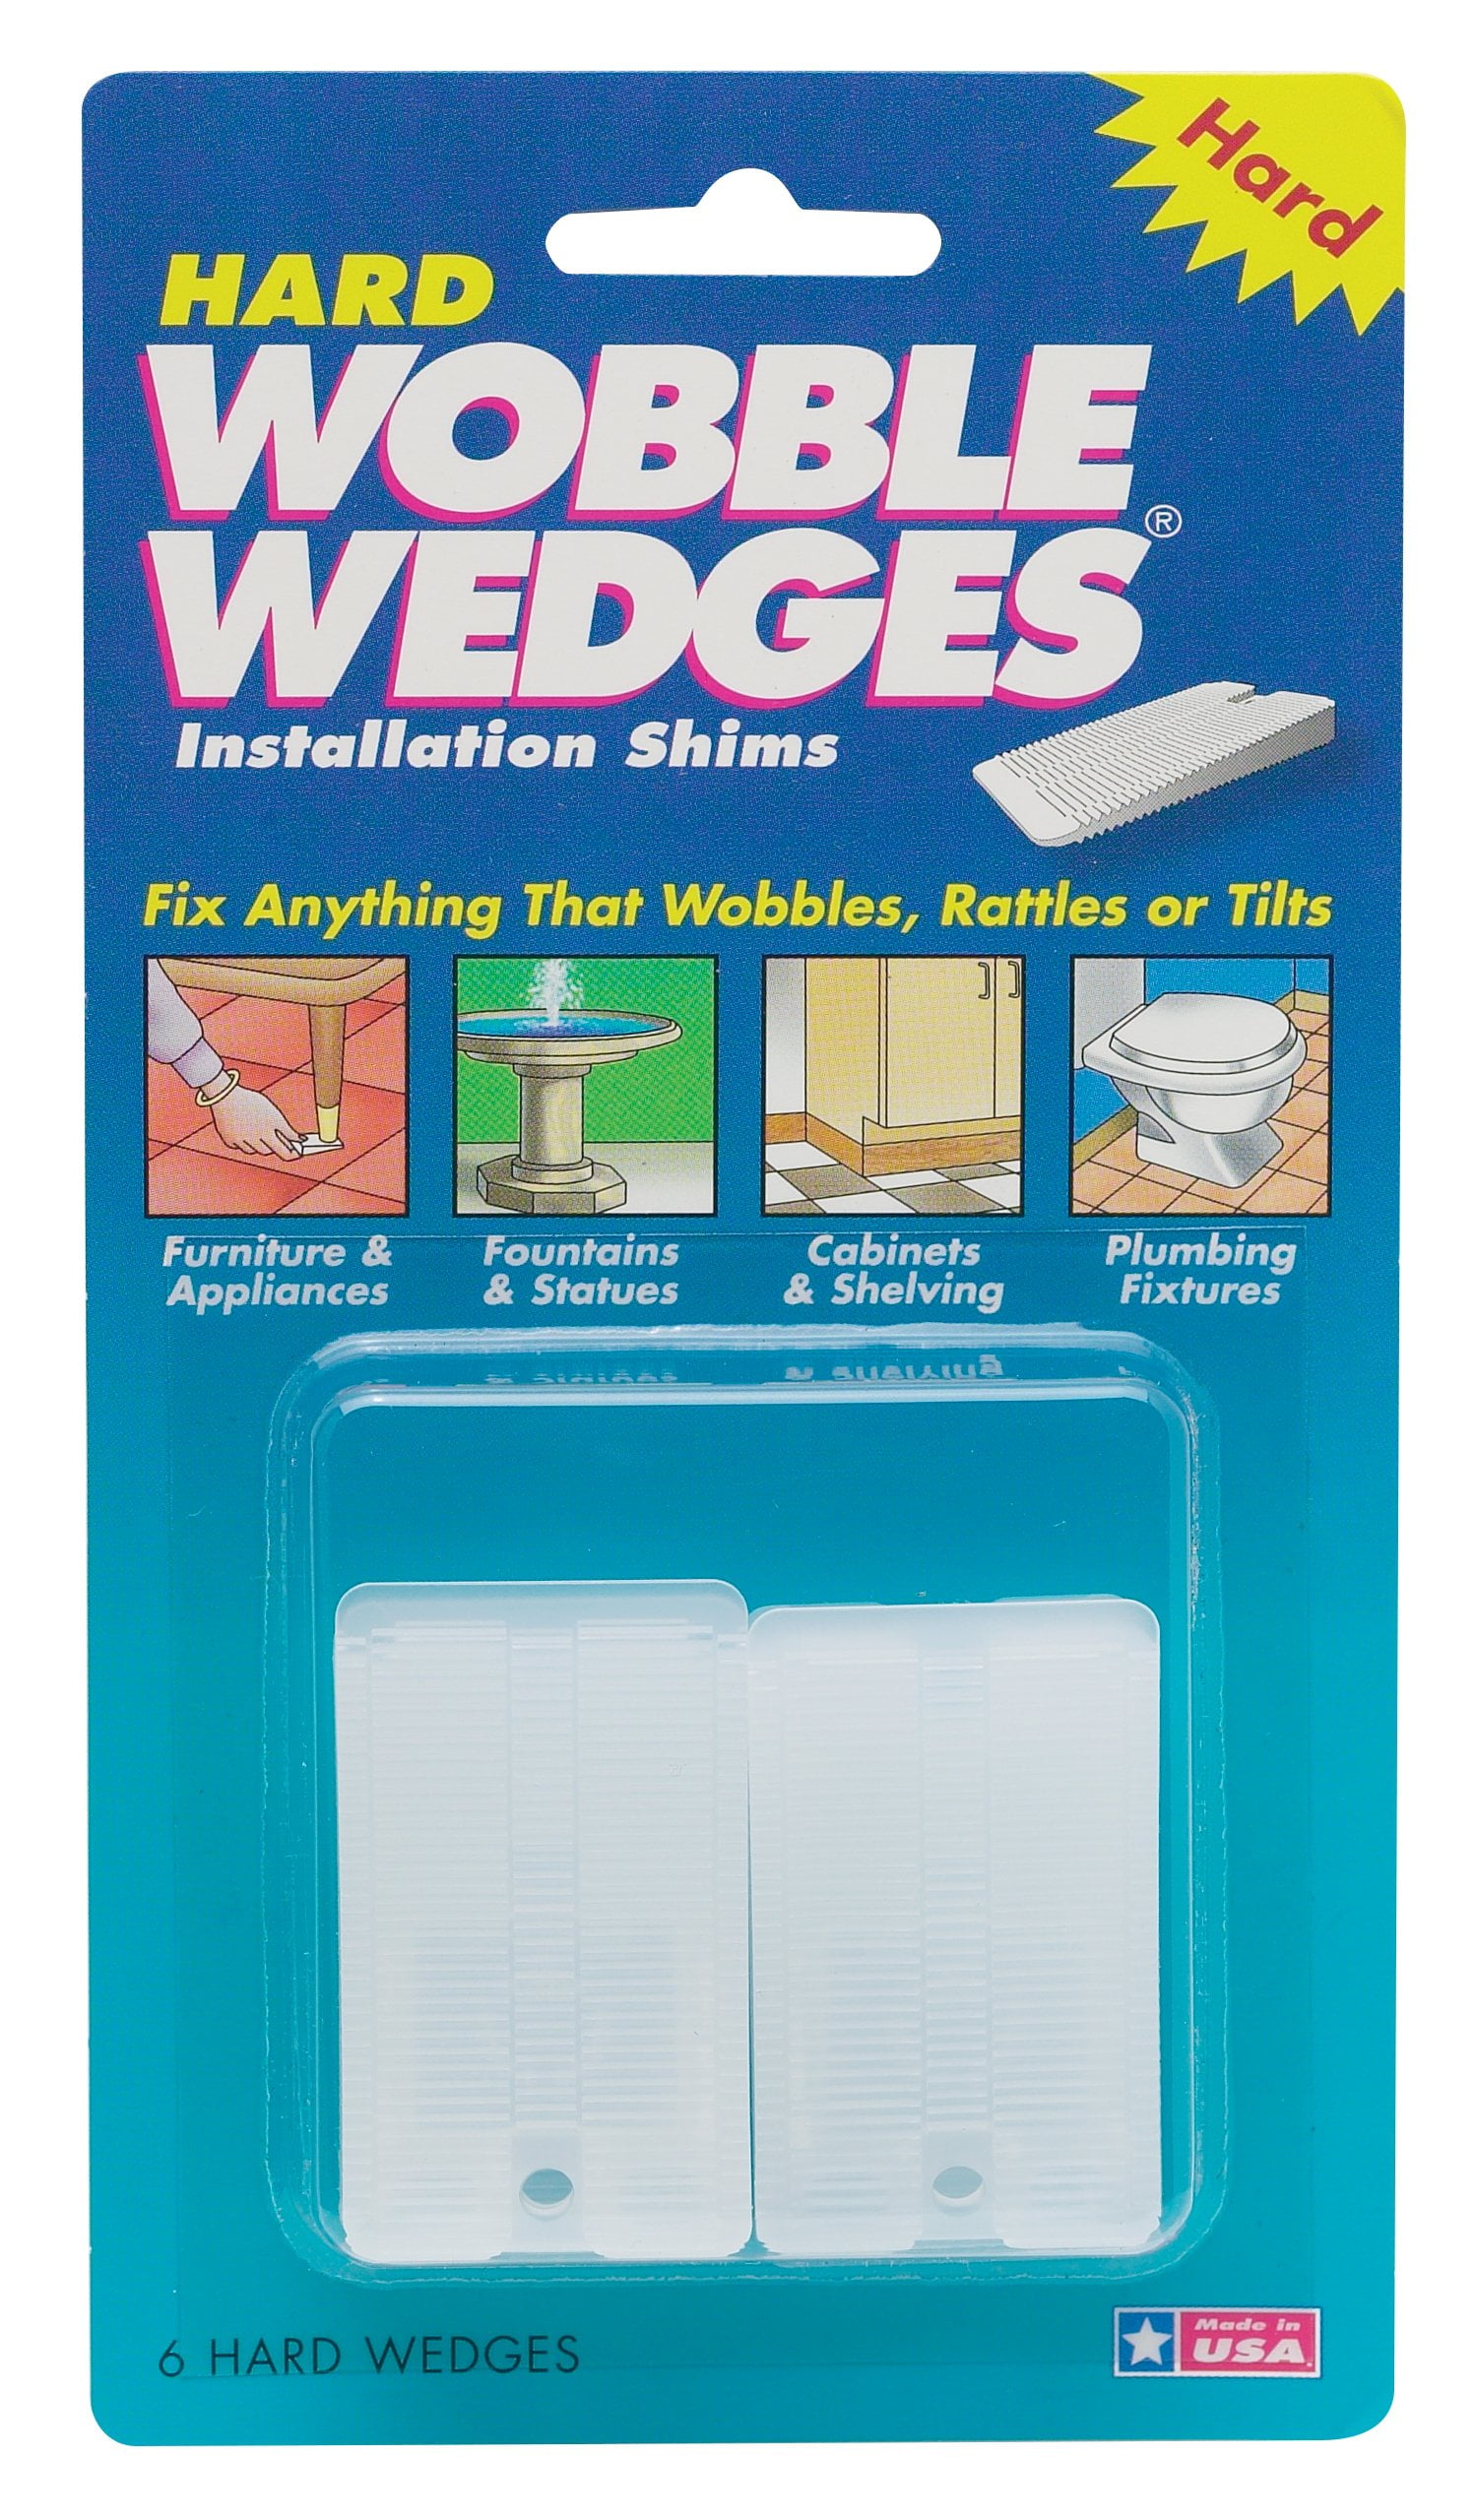 Wobble Wedges Flexible Plastic Shims The Ideal Table Shims Toilet Shims Multi-Purpose Wedges for Home Improvement and Workplace 30 White Wedges and Furniture Levelers